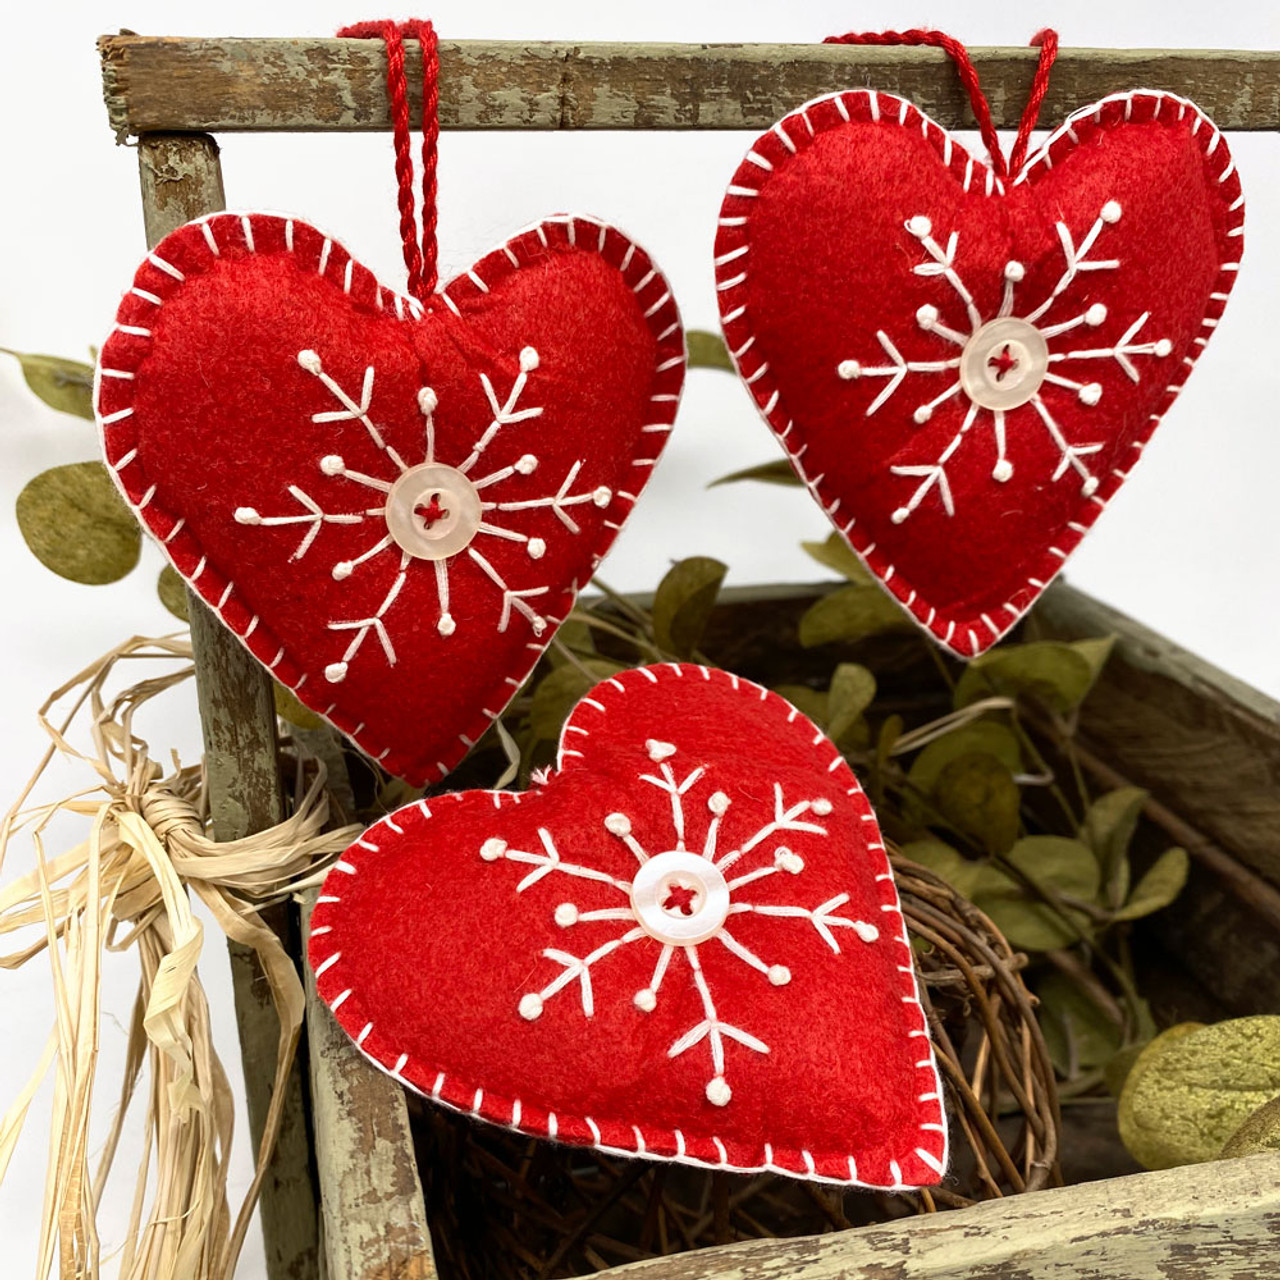 Red Felt Fabric Heart Christmas Ornaments - Set of 3 - by Marilee Home -  Jubilee Fabric